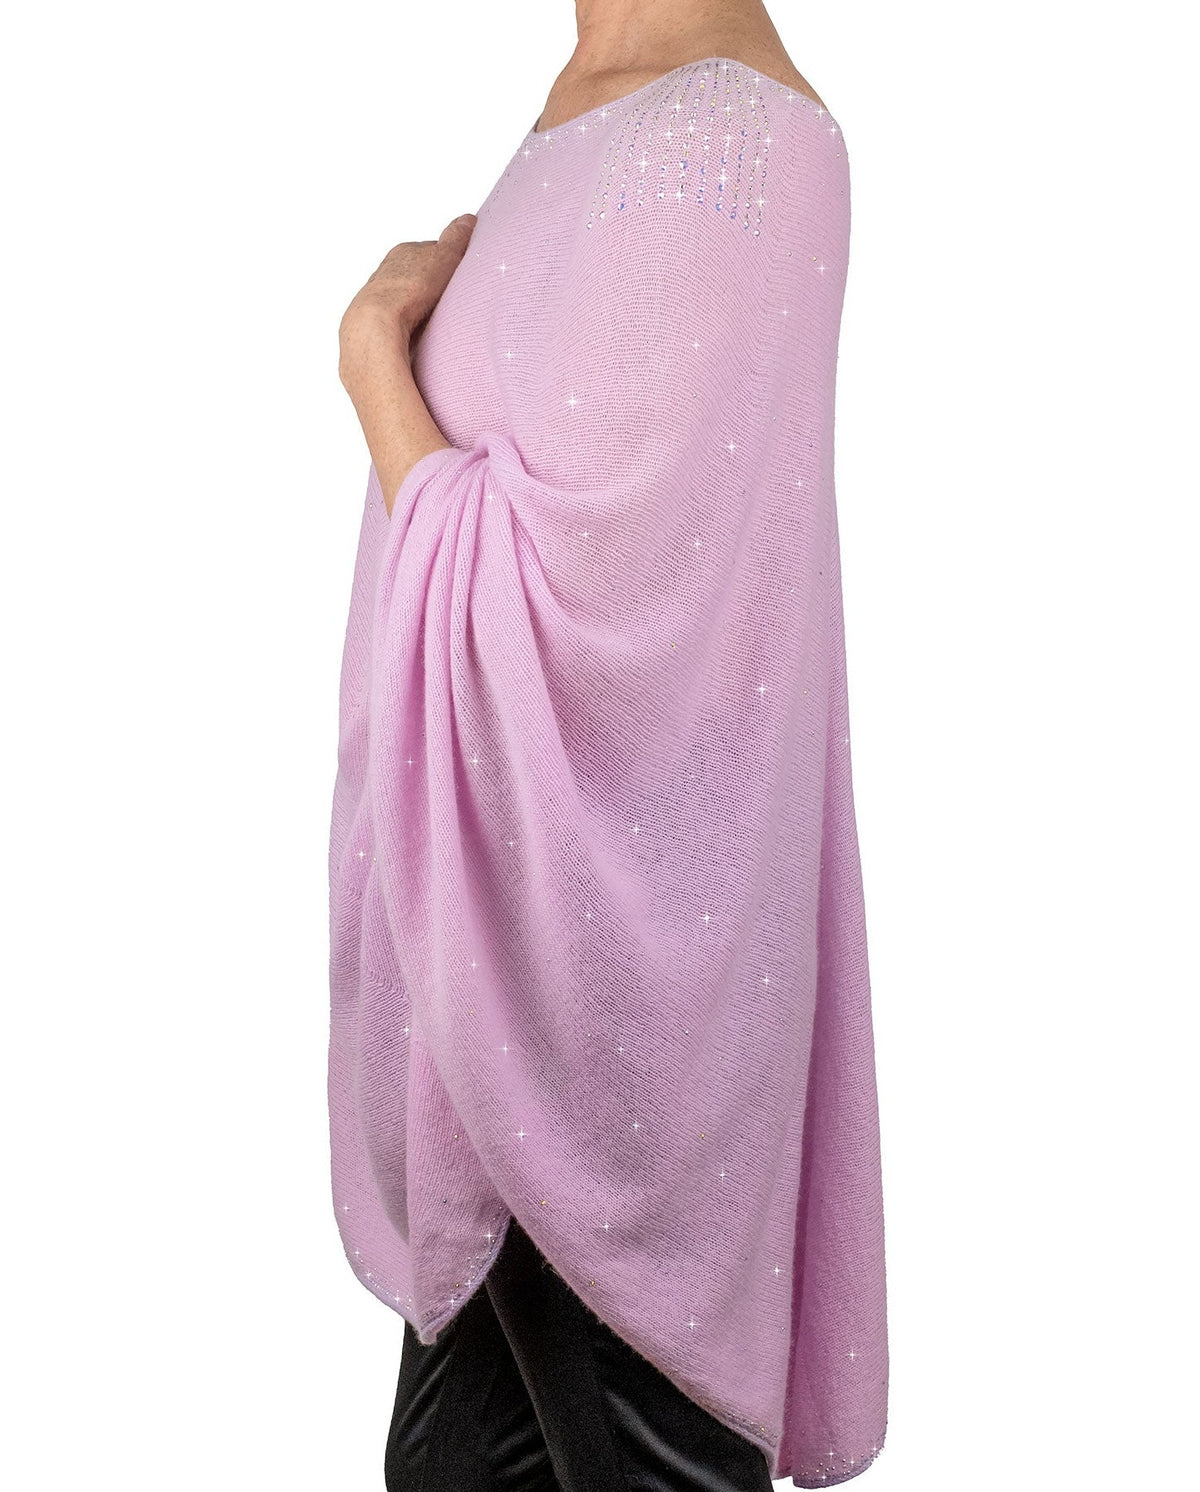 'Lilac' Tissue Weight Epaulette Poncho- size L